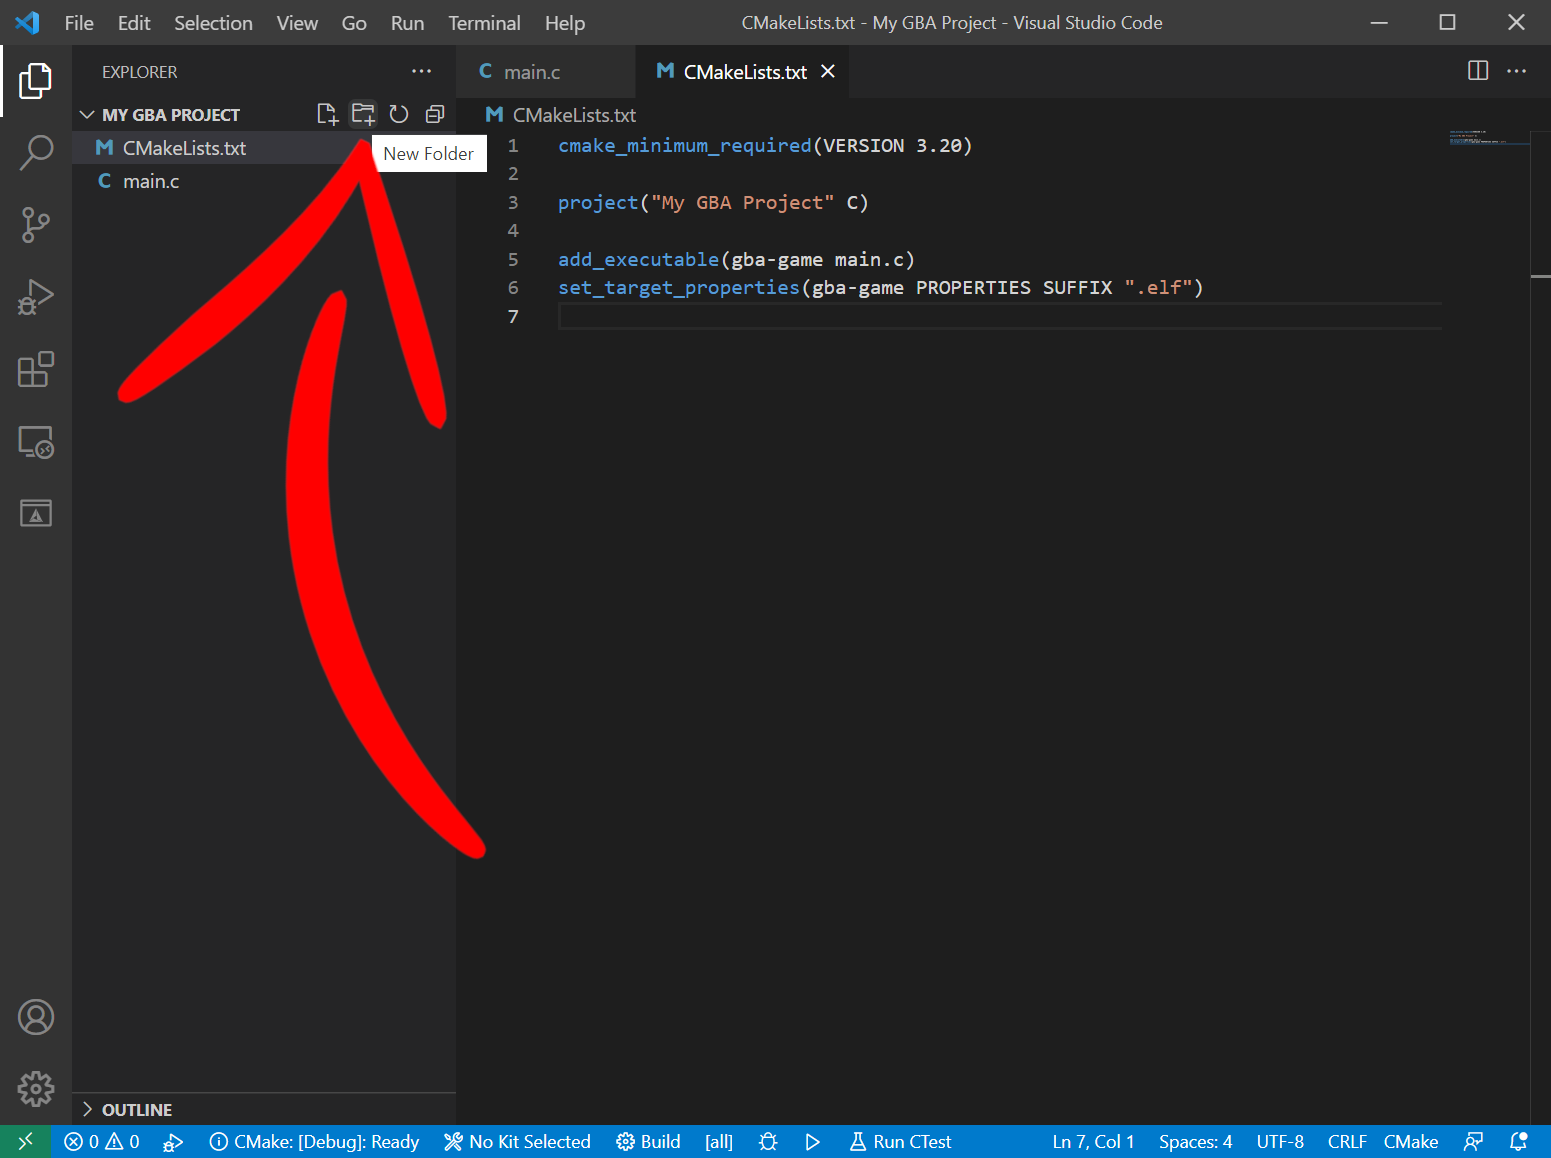 VSCode with a red arrow pointing at the New Folder button